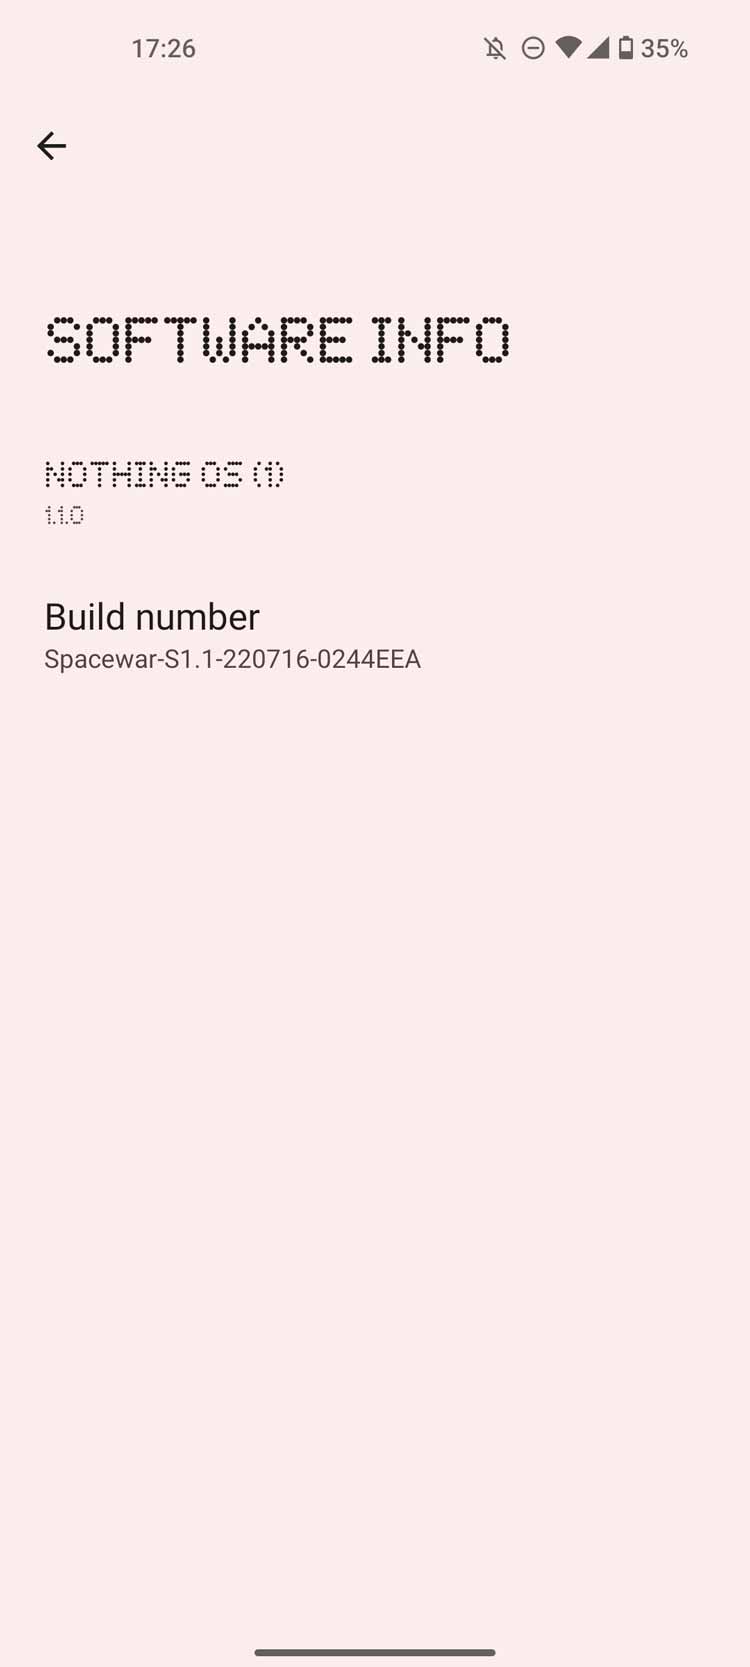 Nothing OS 1.1.0 software build